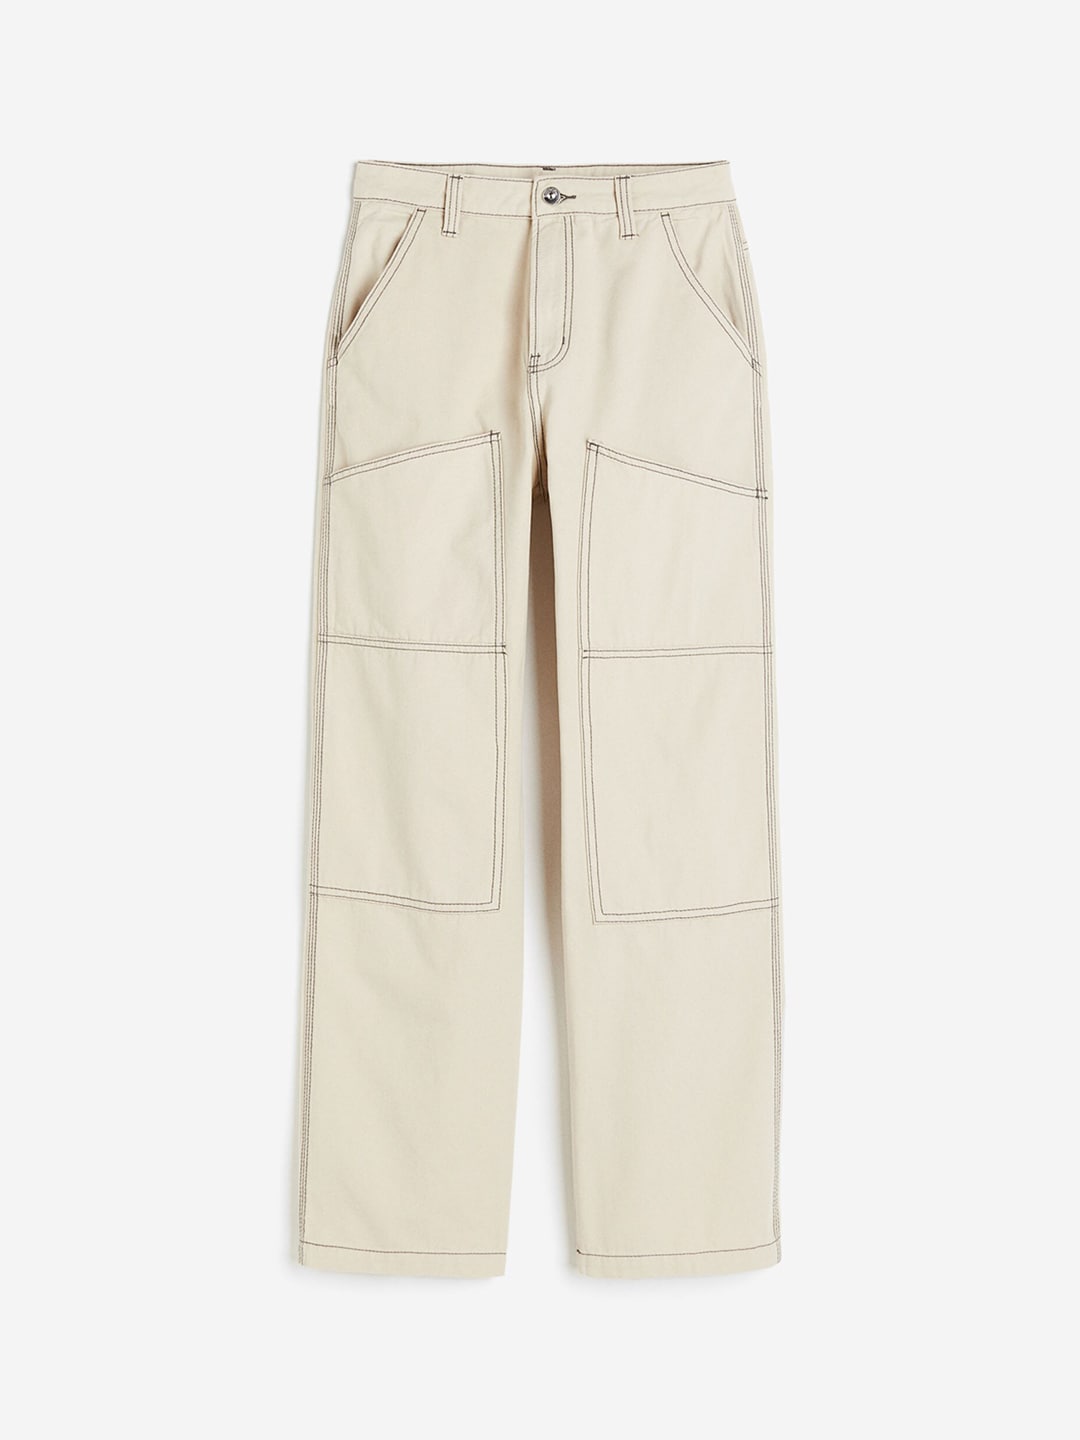 H&M Women Twill Worker Trousers Price in India